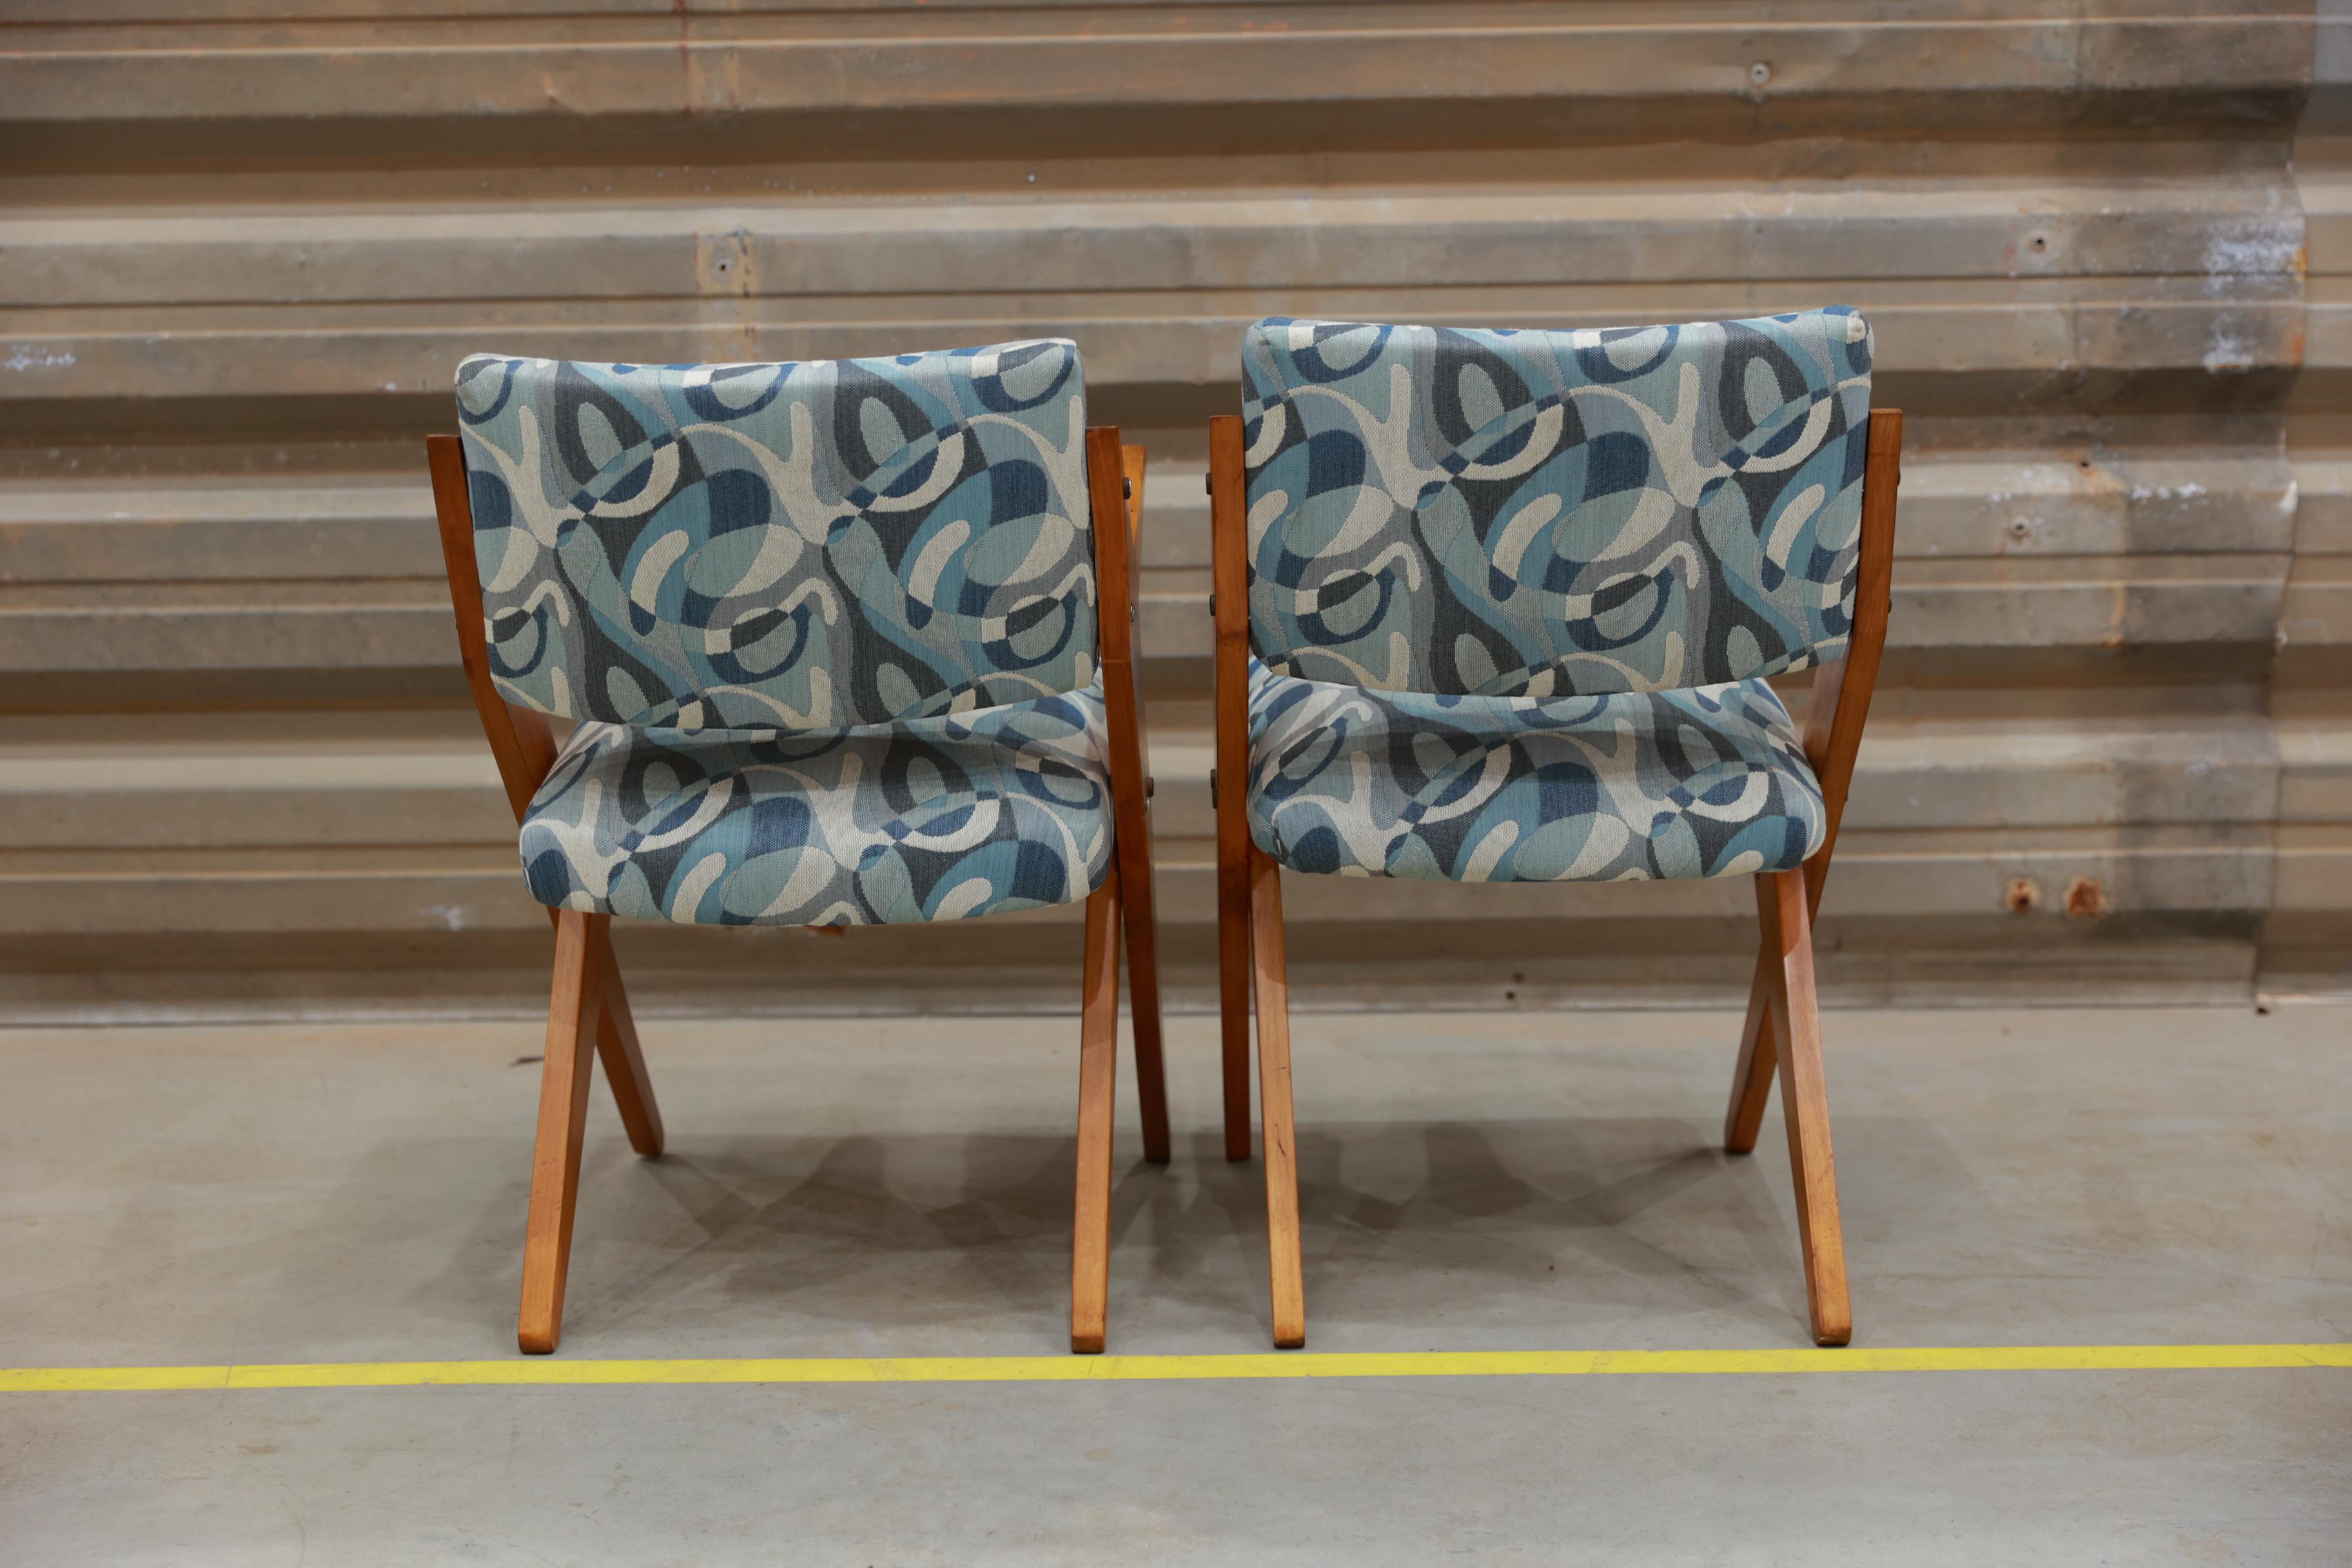 Brazilian Modern Armchairs in hardwood & floral upholstery by Jose Zanine Caldas In Good Condition For Sale In New York, NY